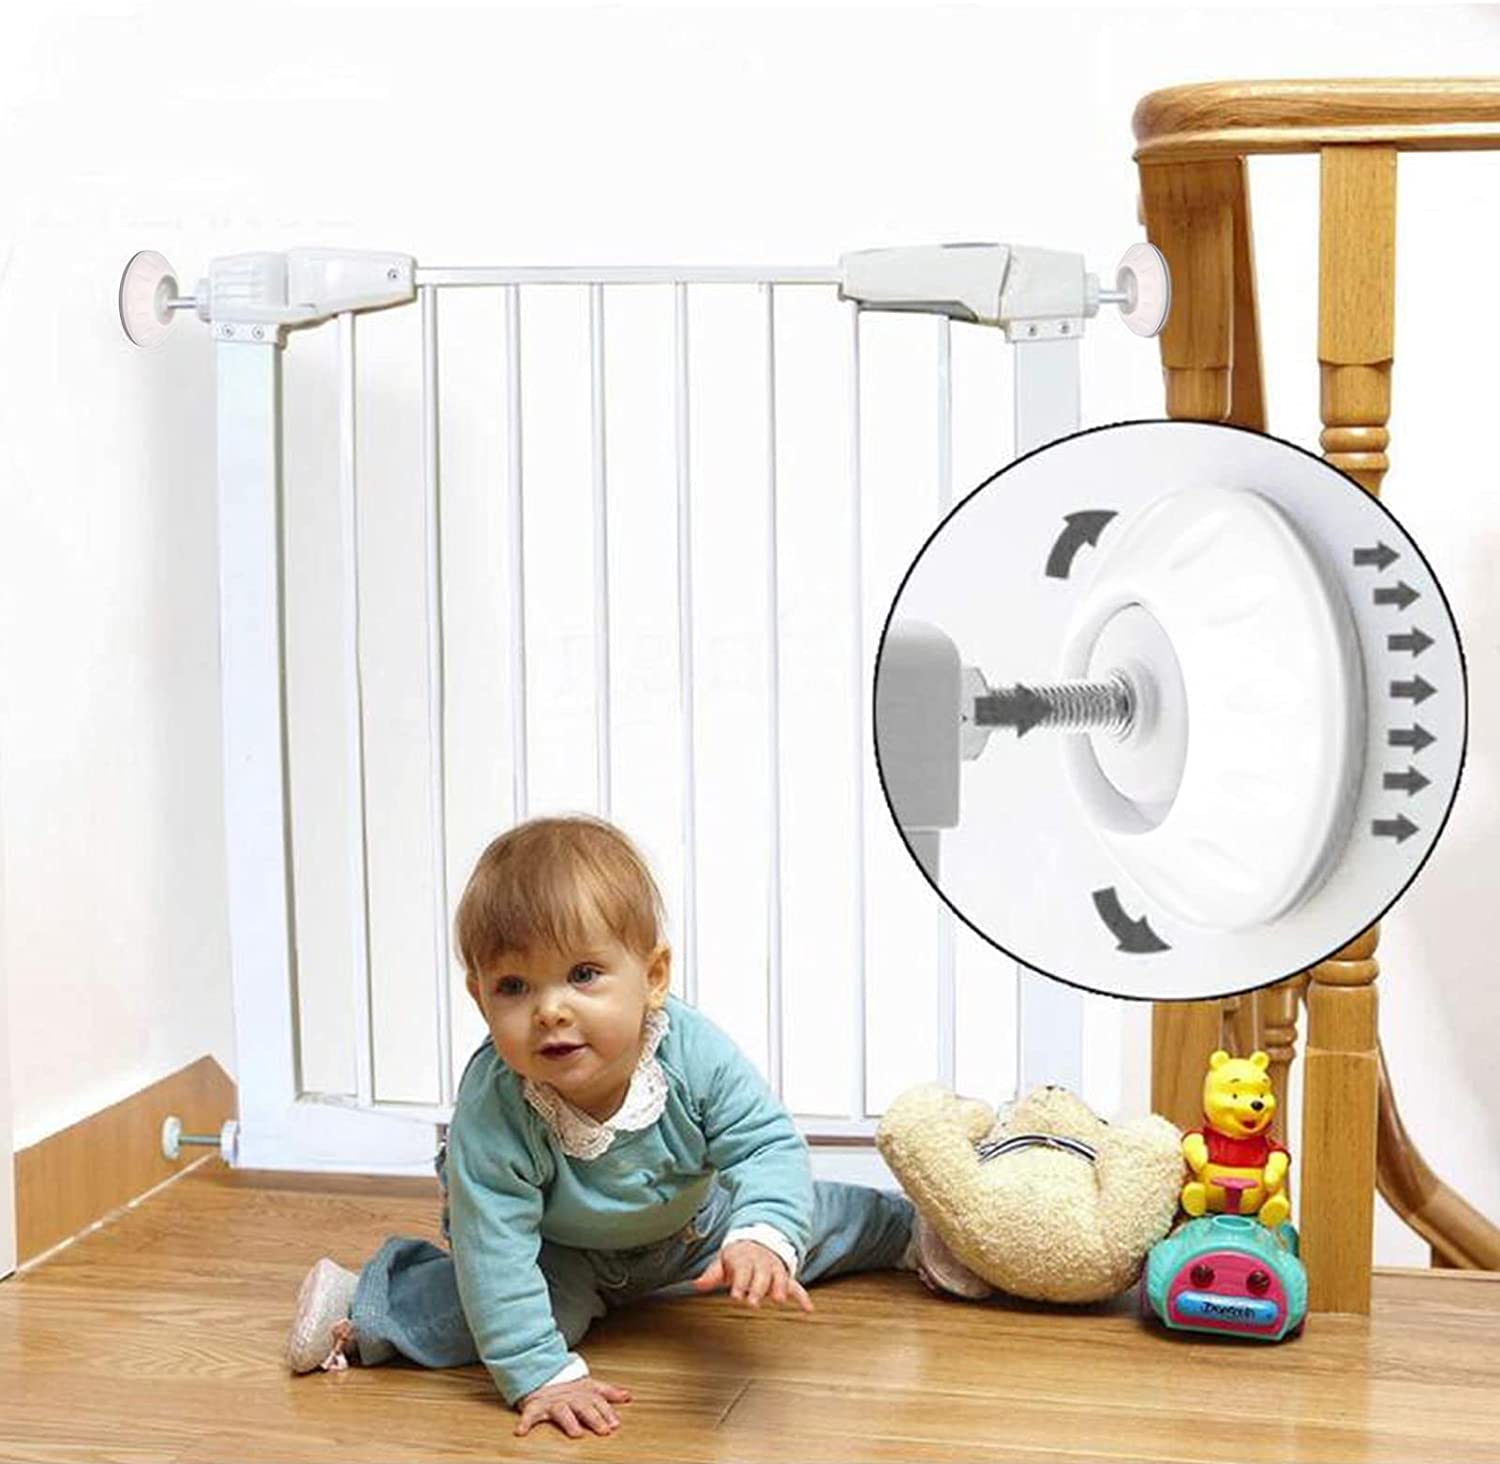 4 Pack Baby Gate Wall Cups,Safety Wall Bumpers Guard Fit for Bottom of Gates - (NC)